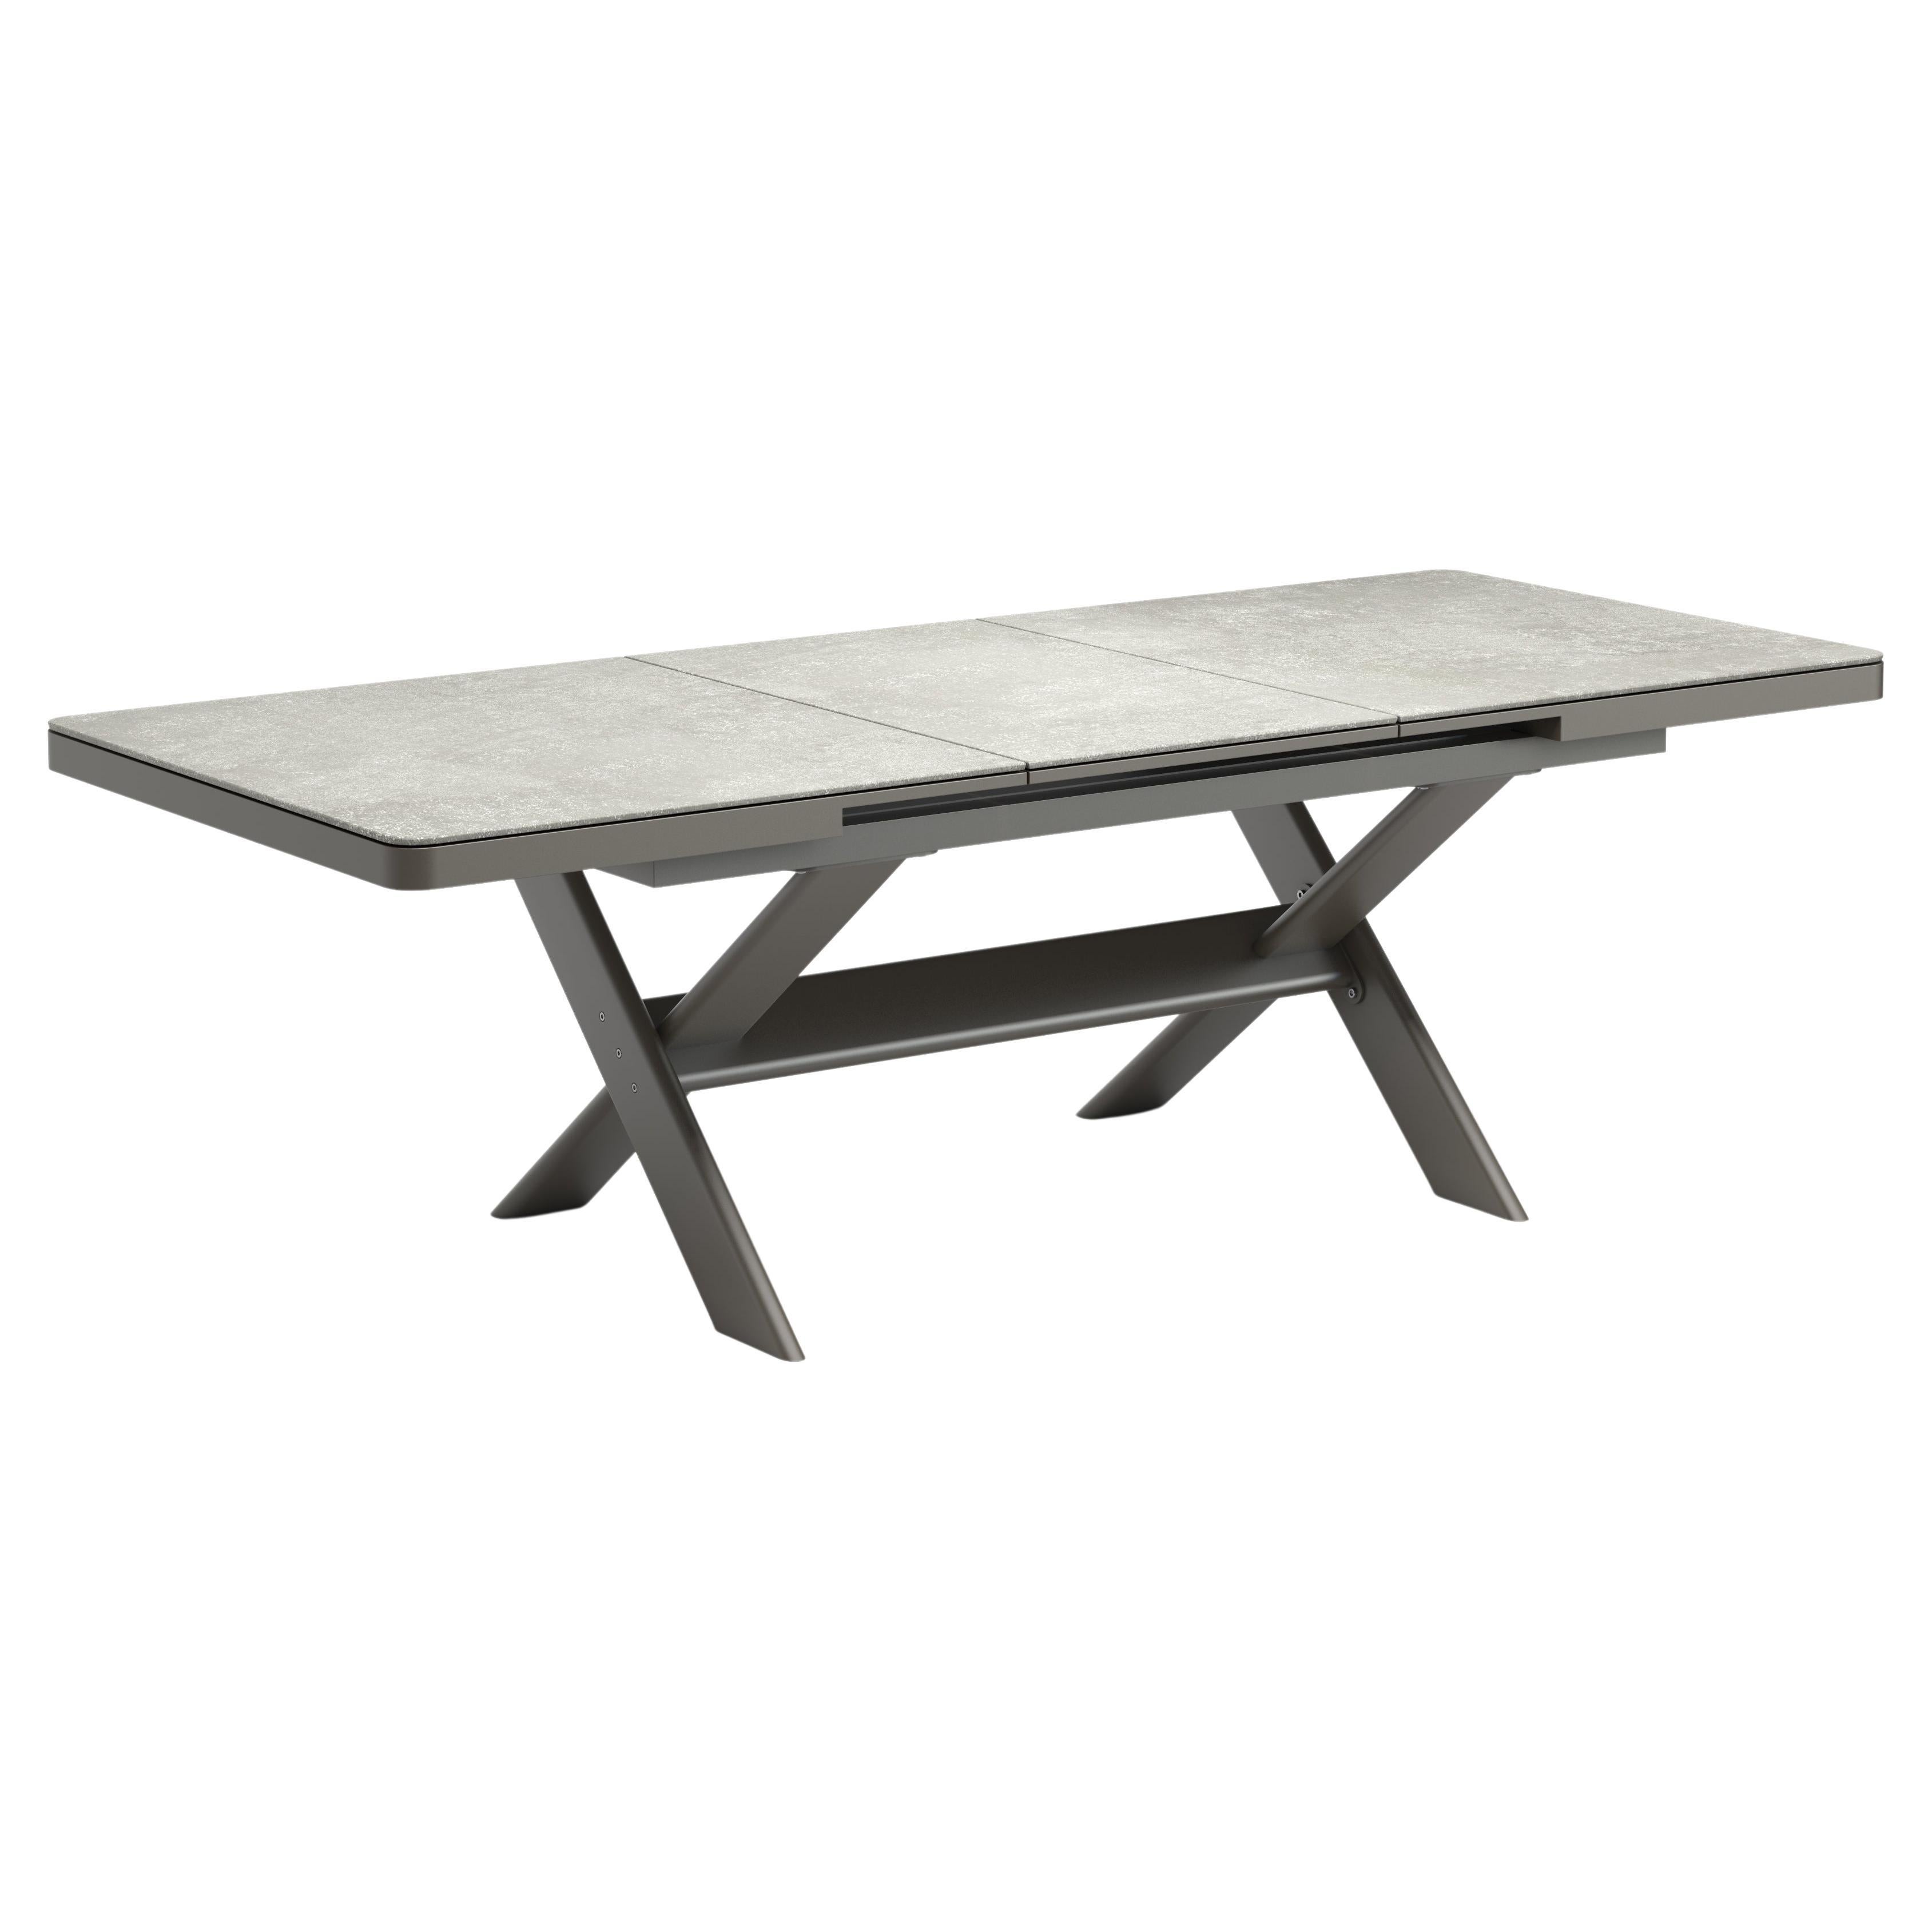 Swan Charcoal Dining Table by Snoc